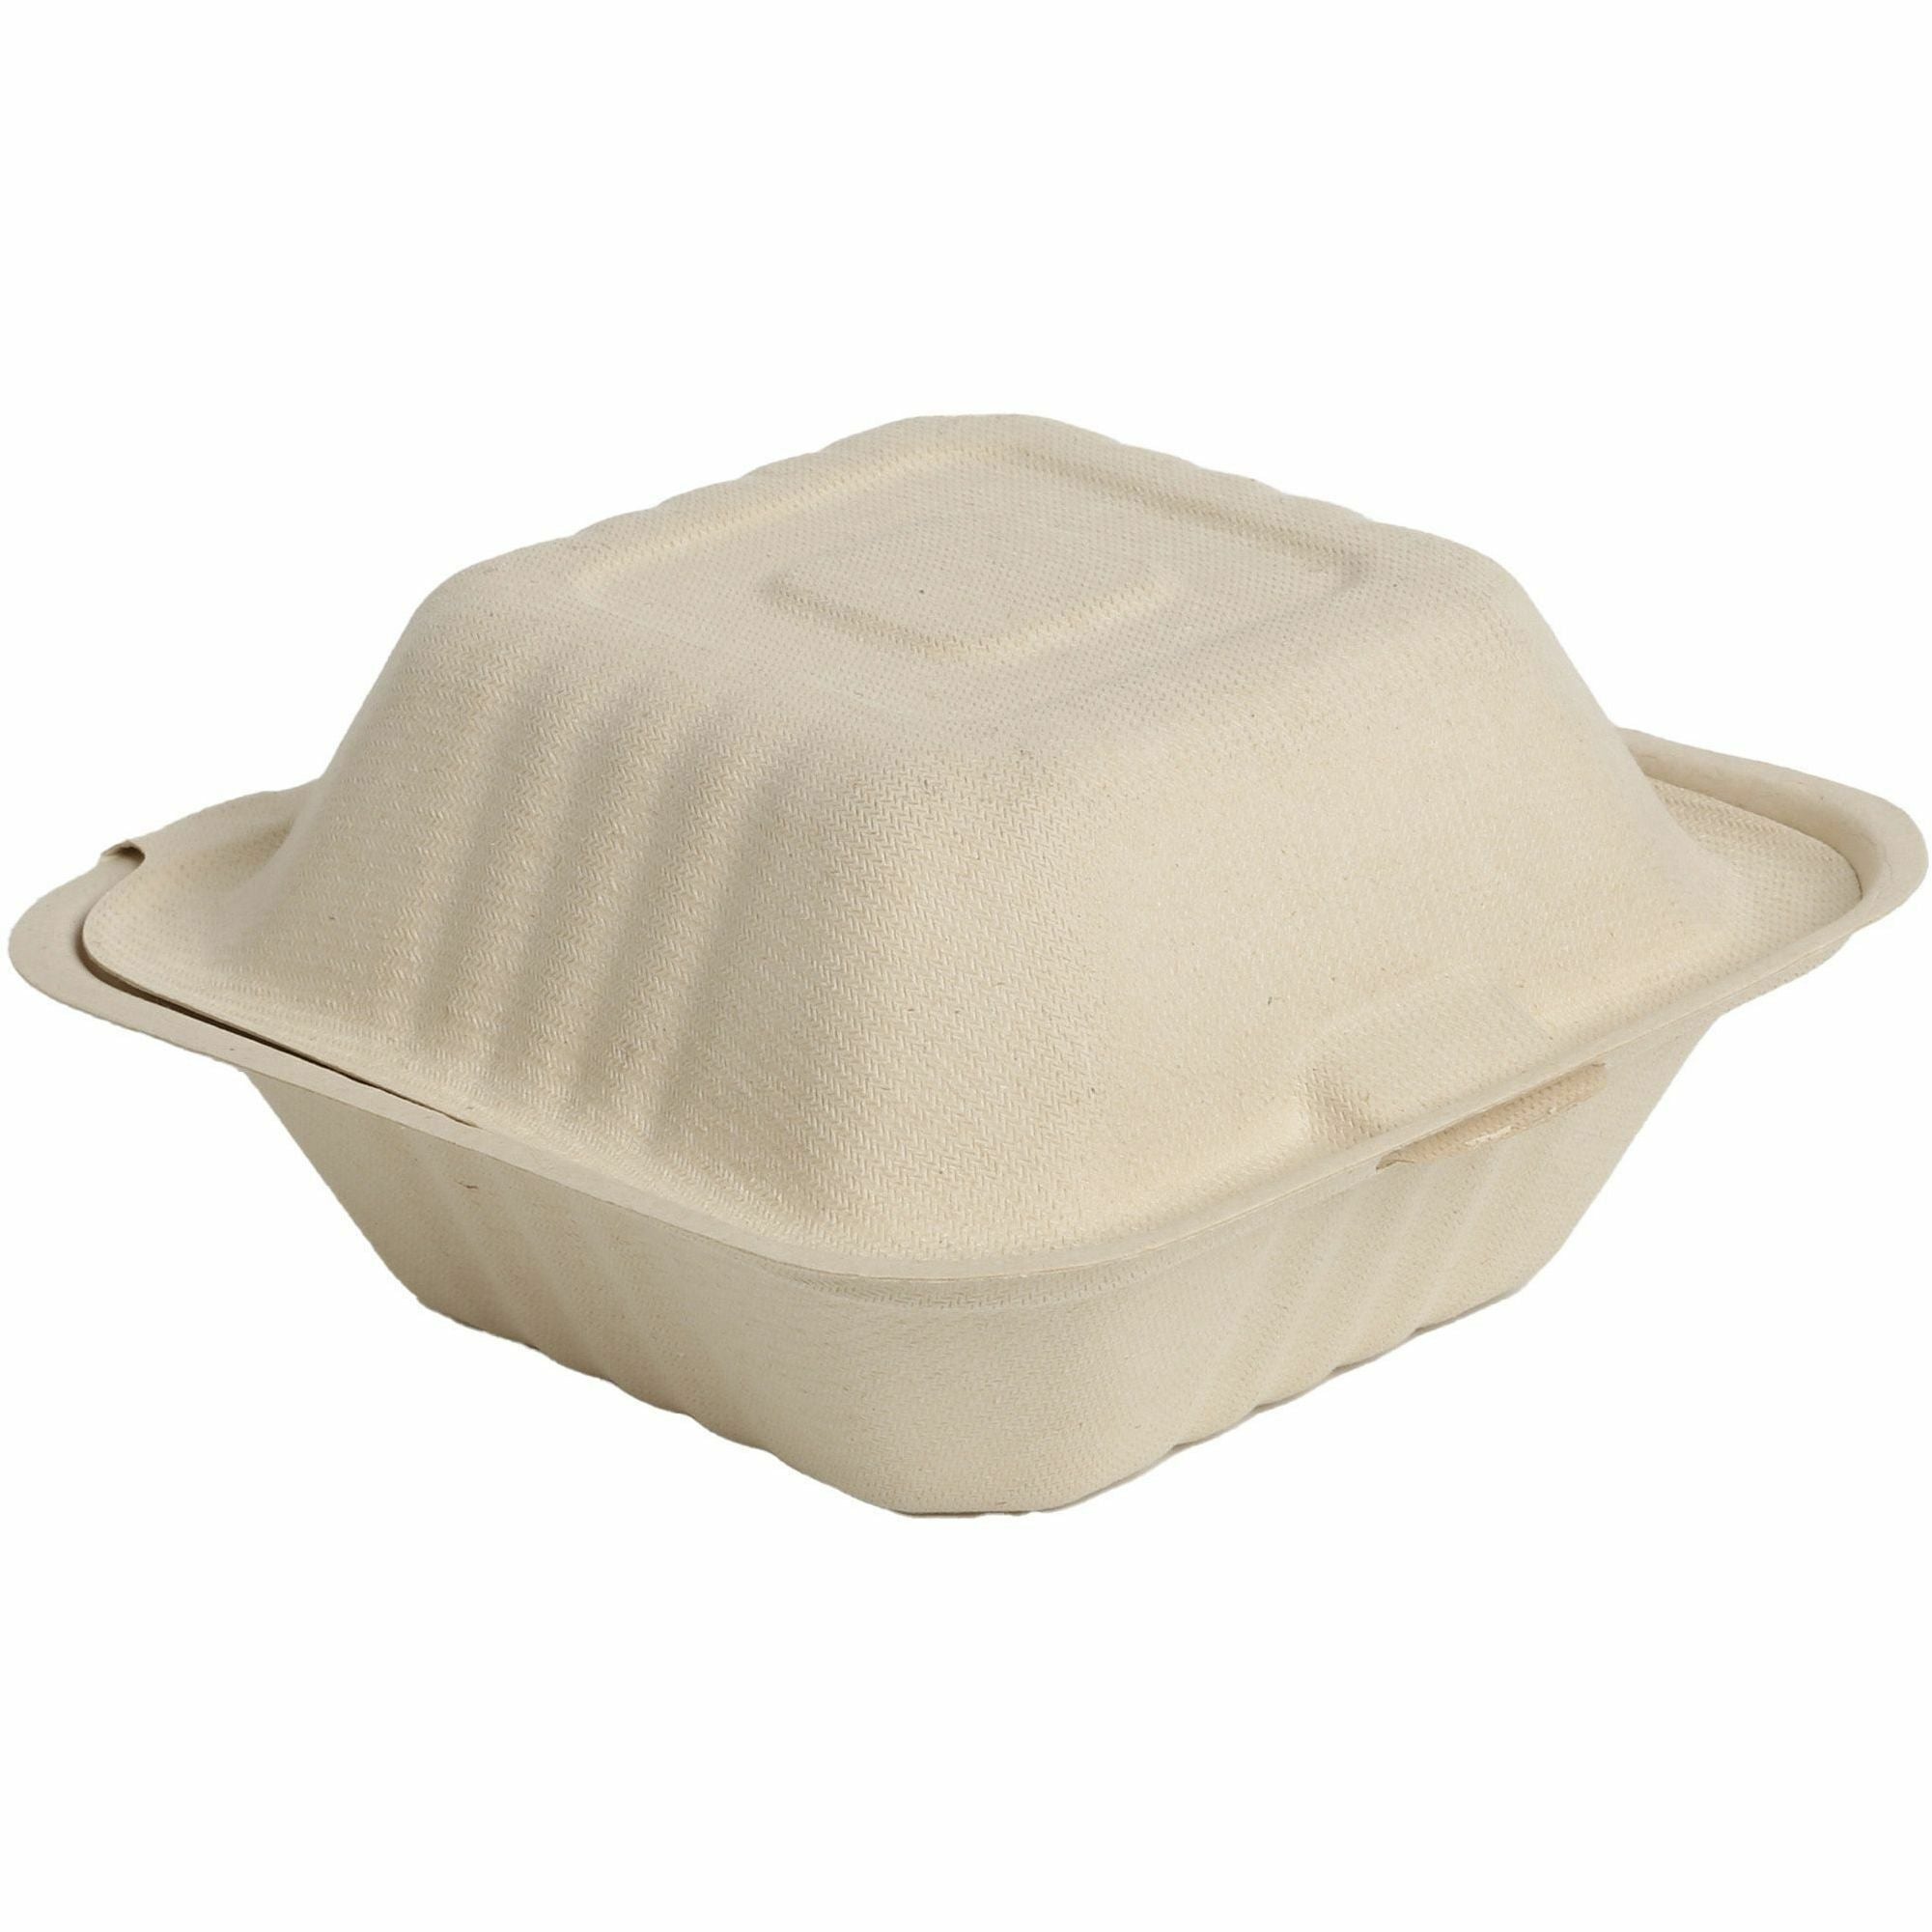 blutable-21-oz-portable-clamshell-containers-food-storage-food-natural-molded-fiber-sugarcane-fiber-body-500-carton_rmlmfhc61c - 2